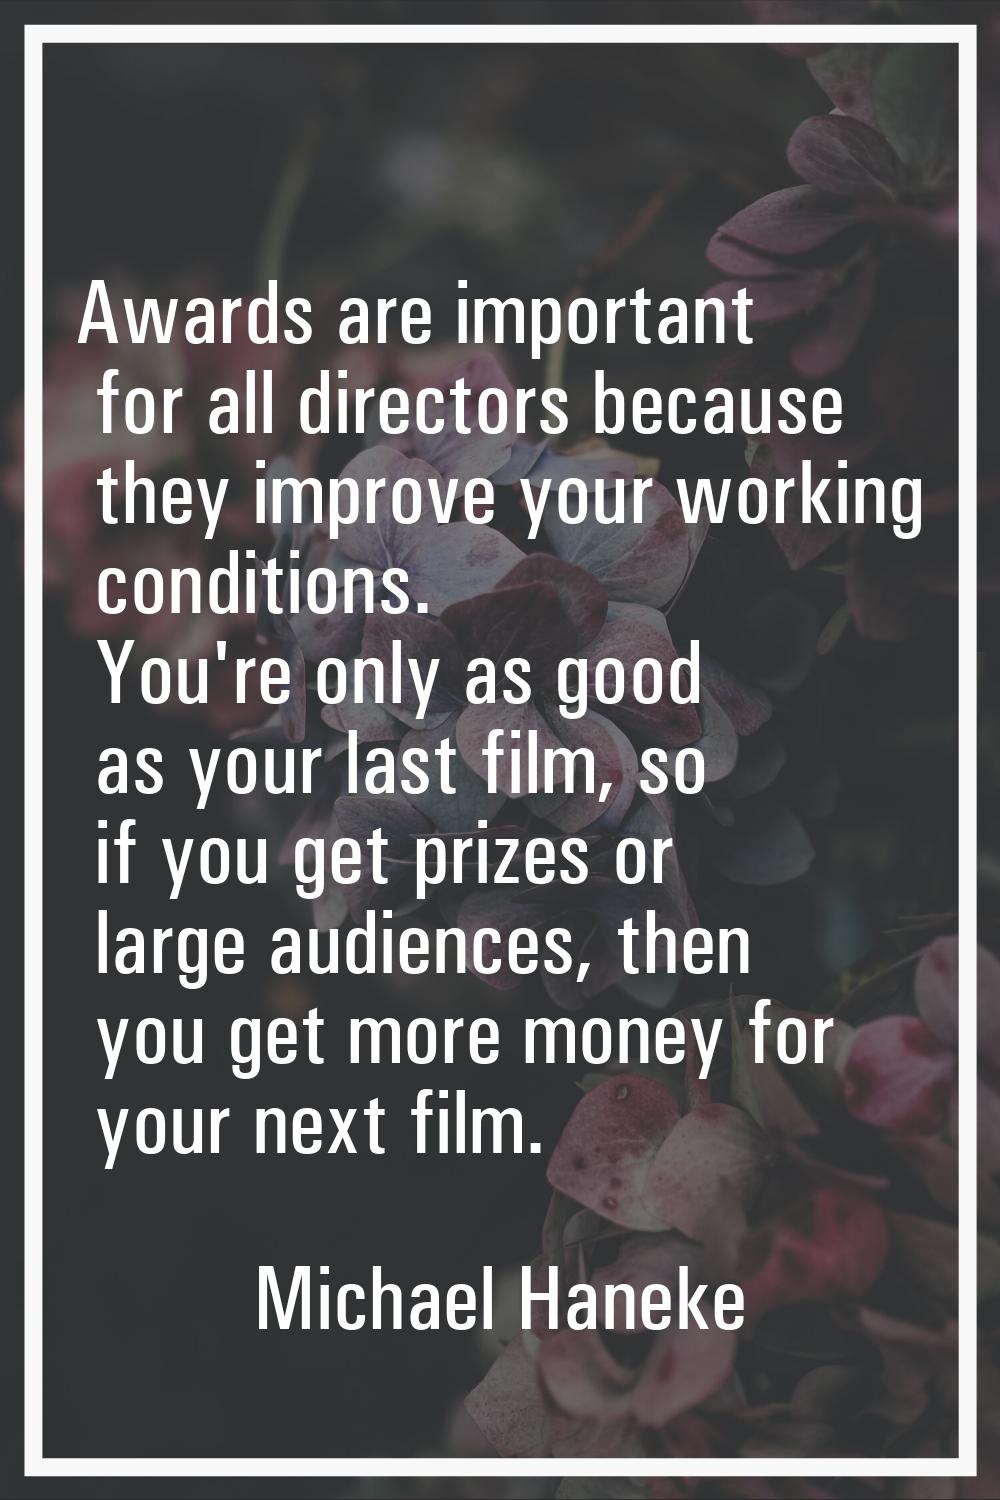 Awards are important for all directors because they improve your working conditions. You're only as